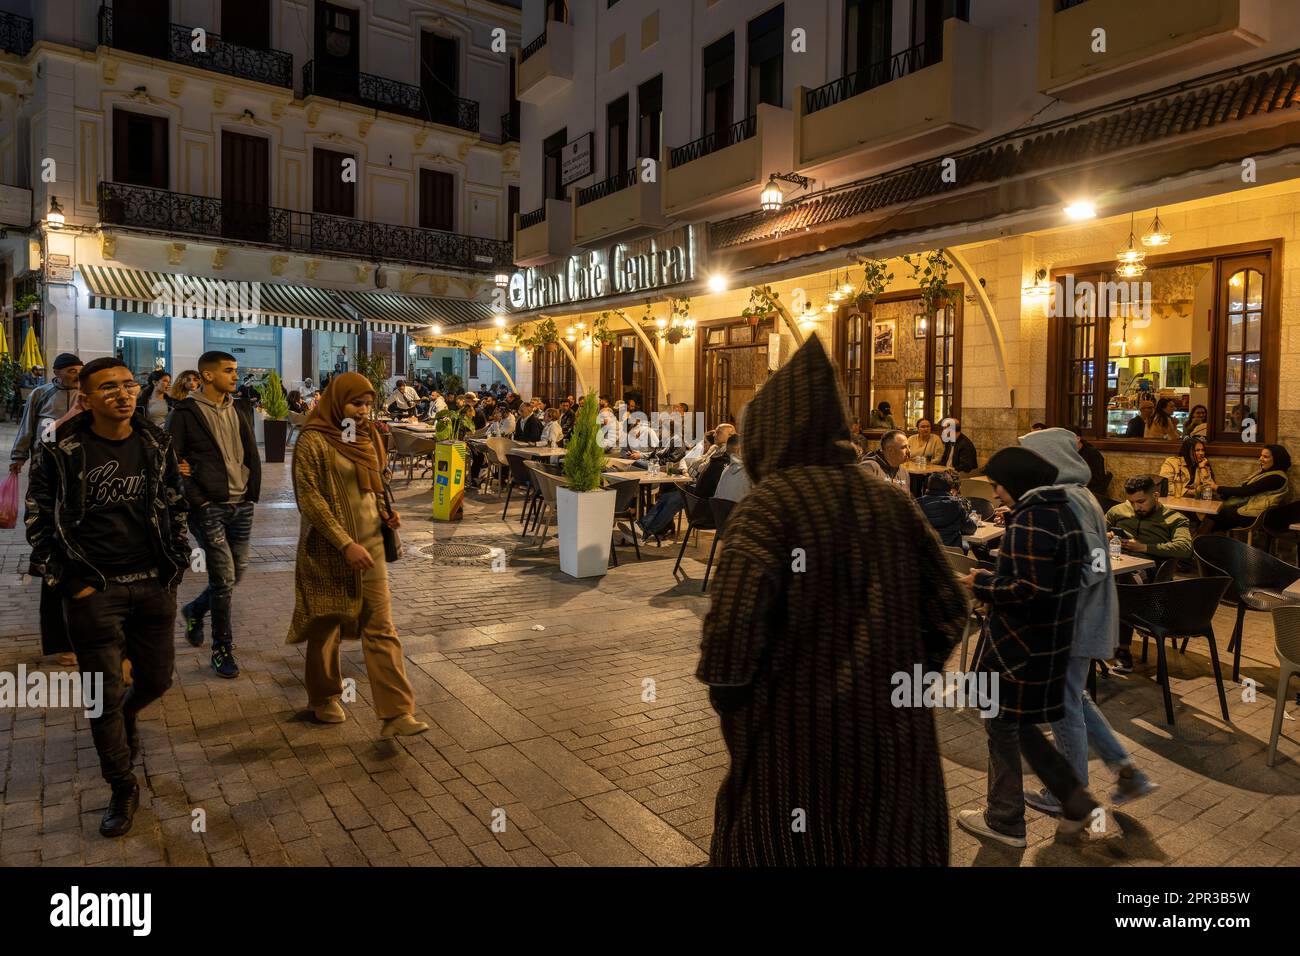 People strolling through the Small Souk Square at night. Stock Photo